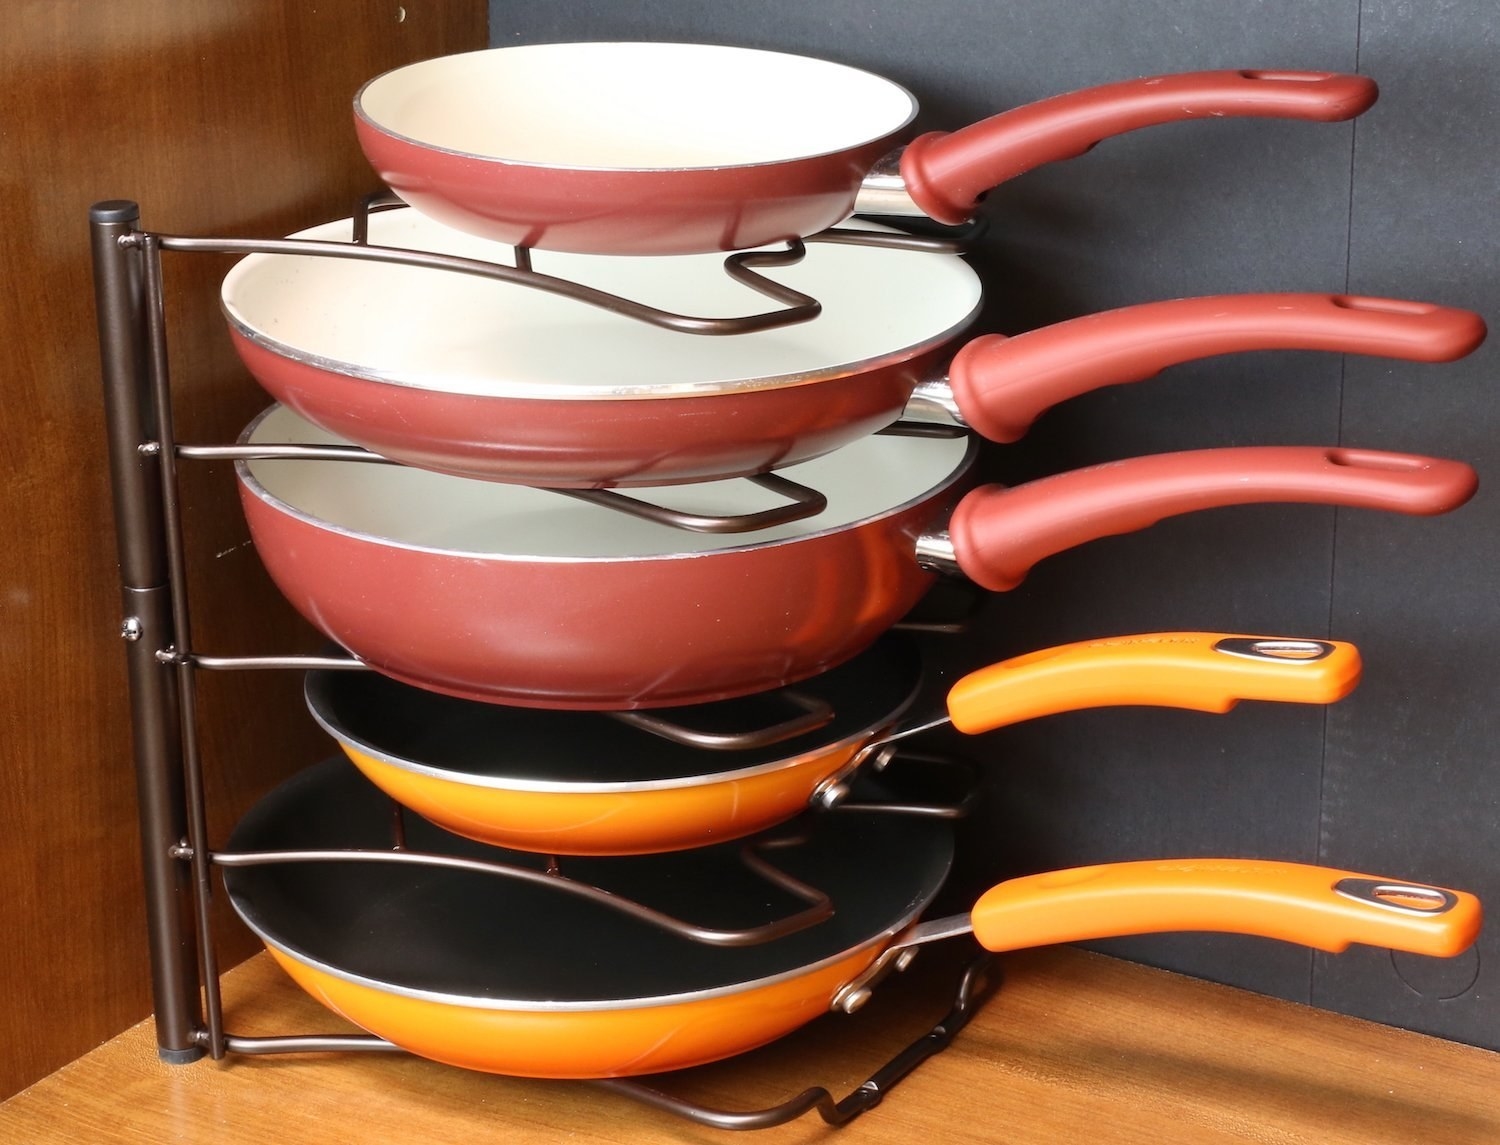 pans stacked in storage system